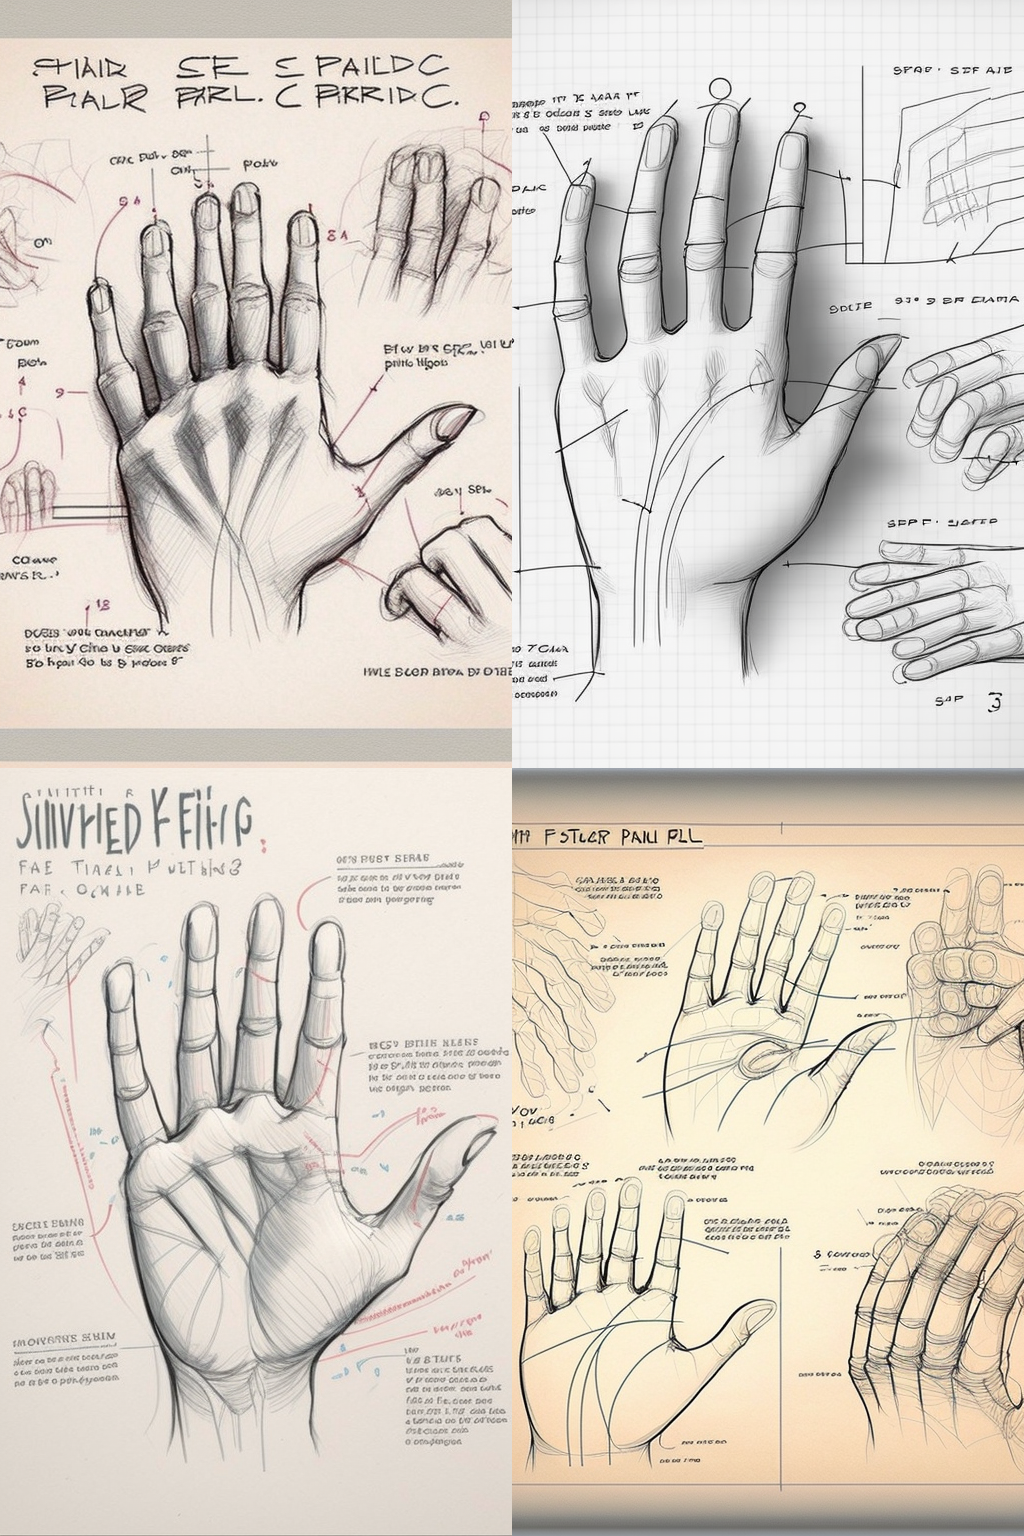 Four sketches surrounded by nonsense text as if from an art textbook about how to draw hands, but off in various ways. Several hands have six fingers instead of the usual five. One hand sketch shows fingers too-widely spaced while two others show fingers far too-closely spaced. One sketch shows the lines of the bones inside the hand that connect the fingers to the wrist crossing over one another. One sketch one finger with two fingernails. Another shows palm-crease lines that suggest that the palm closes side-to-side. Another shows fingers with too many knuckles. The most confused sketch suggests a finger grid, where fingers are chains of knuckles that go both along the hand and across the hand.